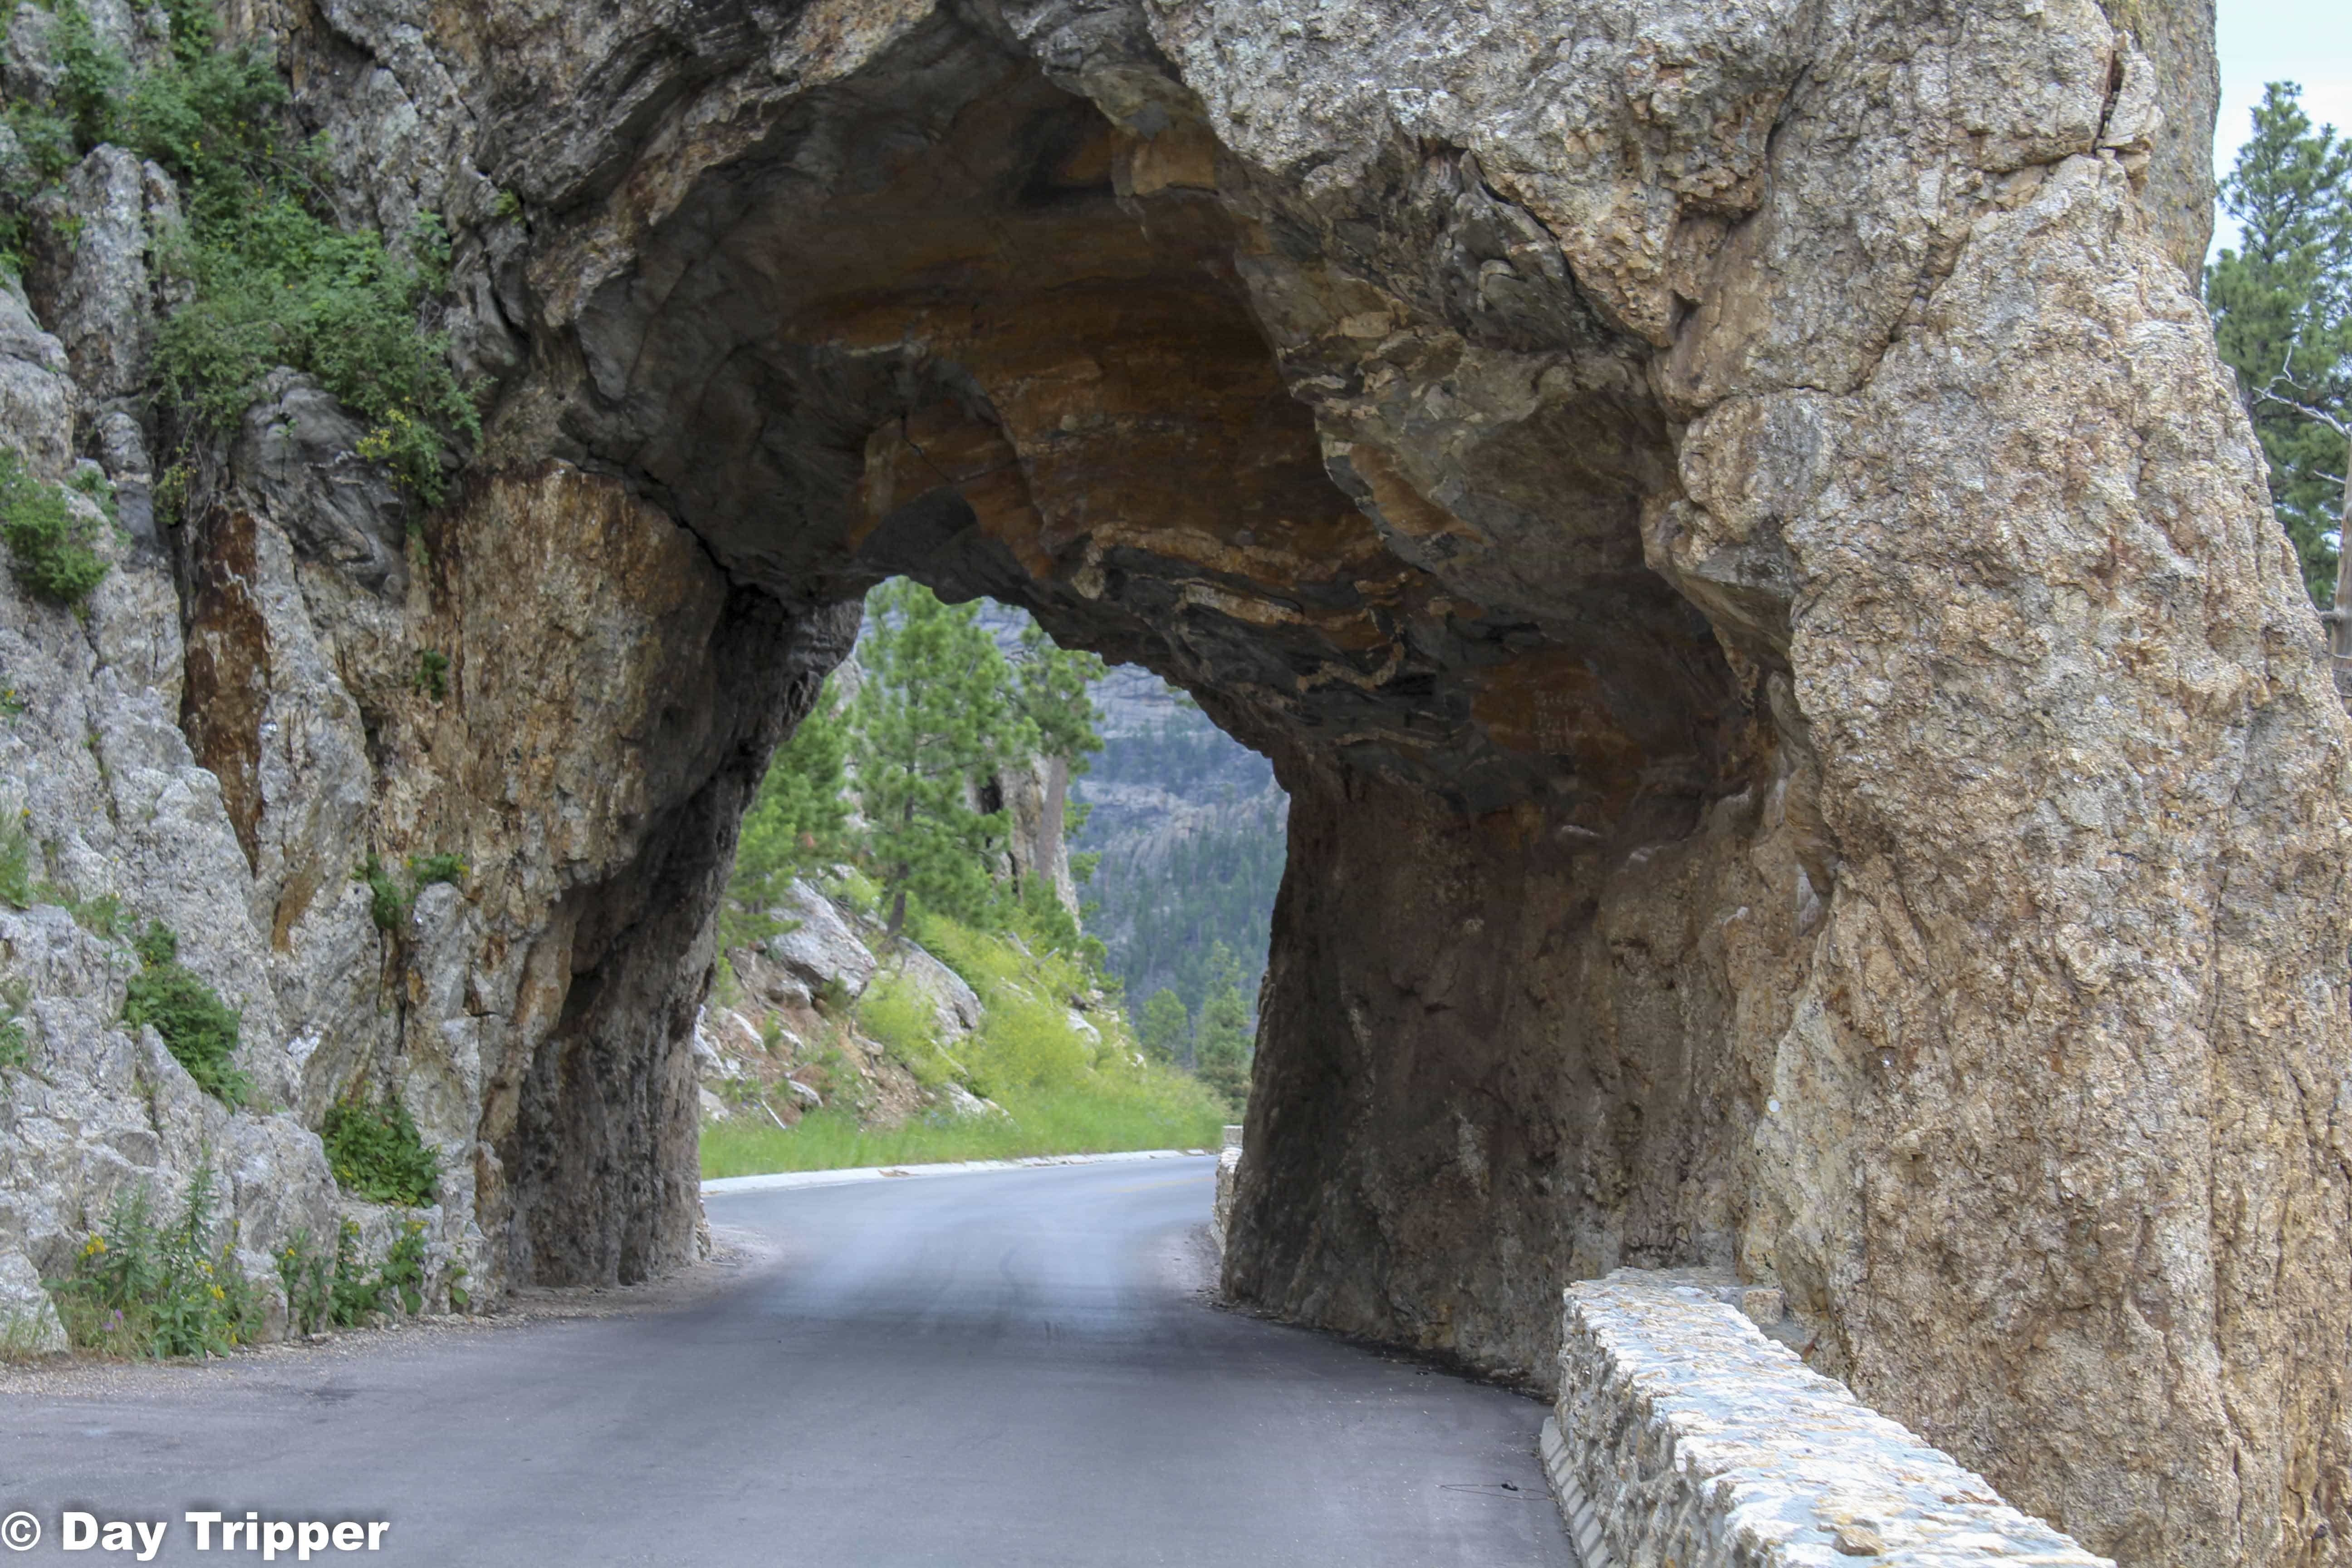 The tunnels of Needles Highway